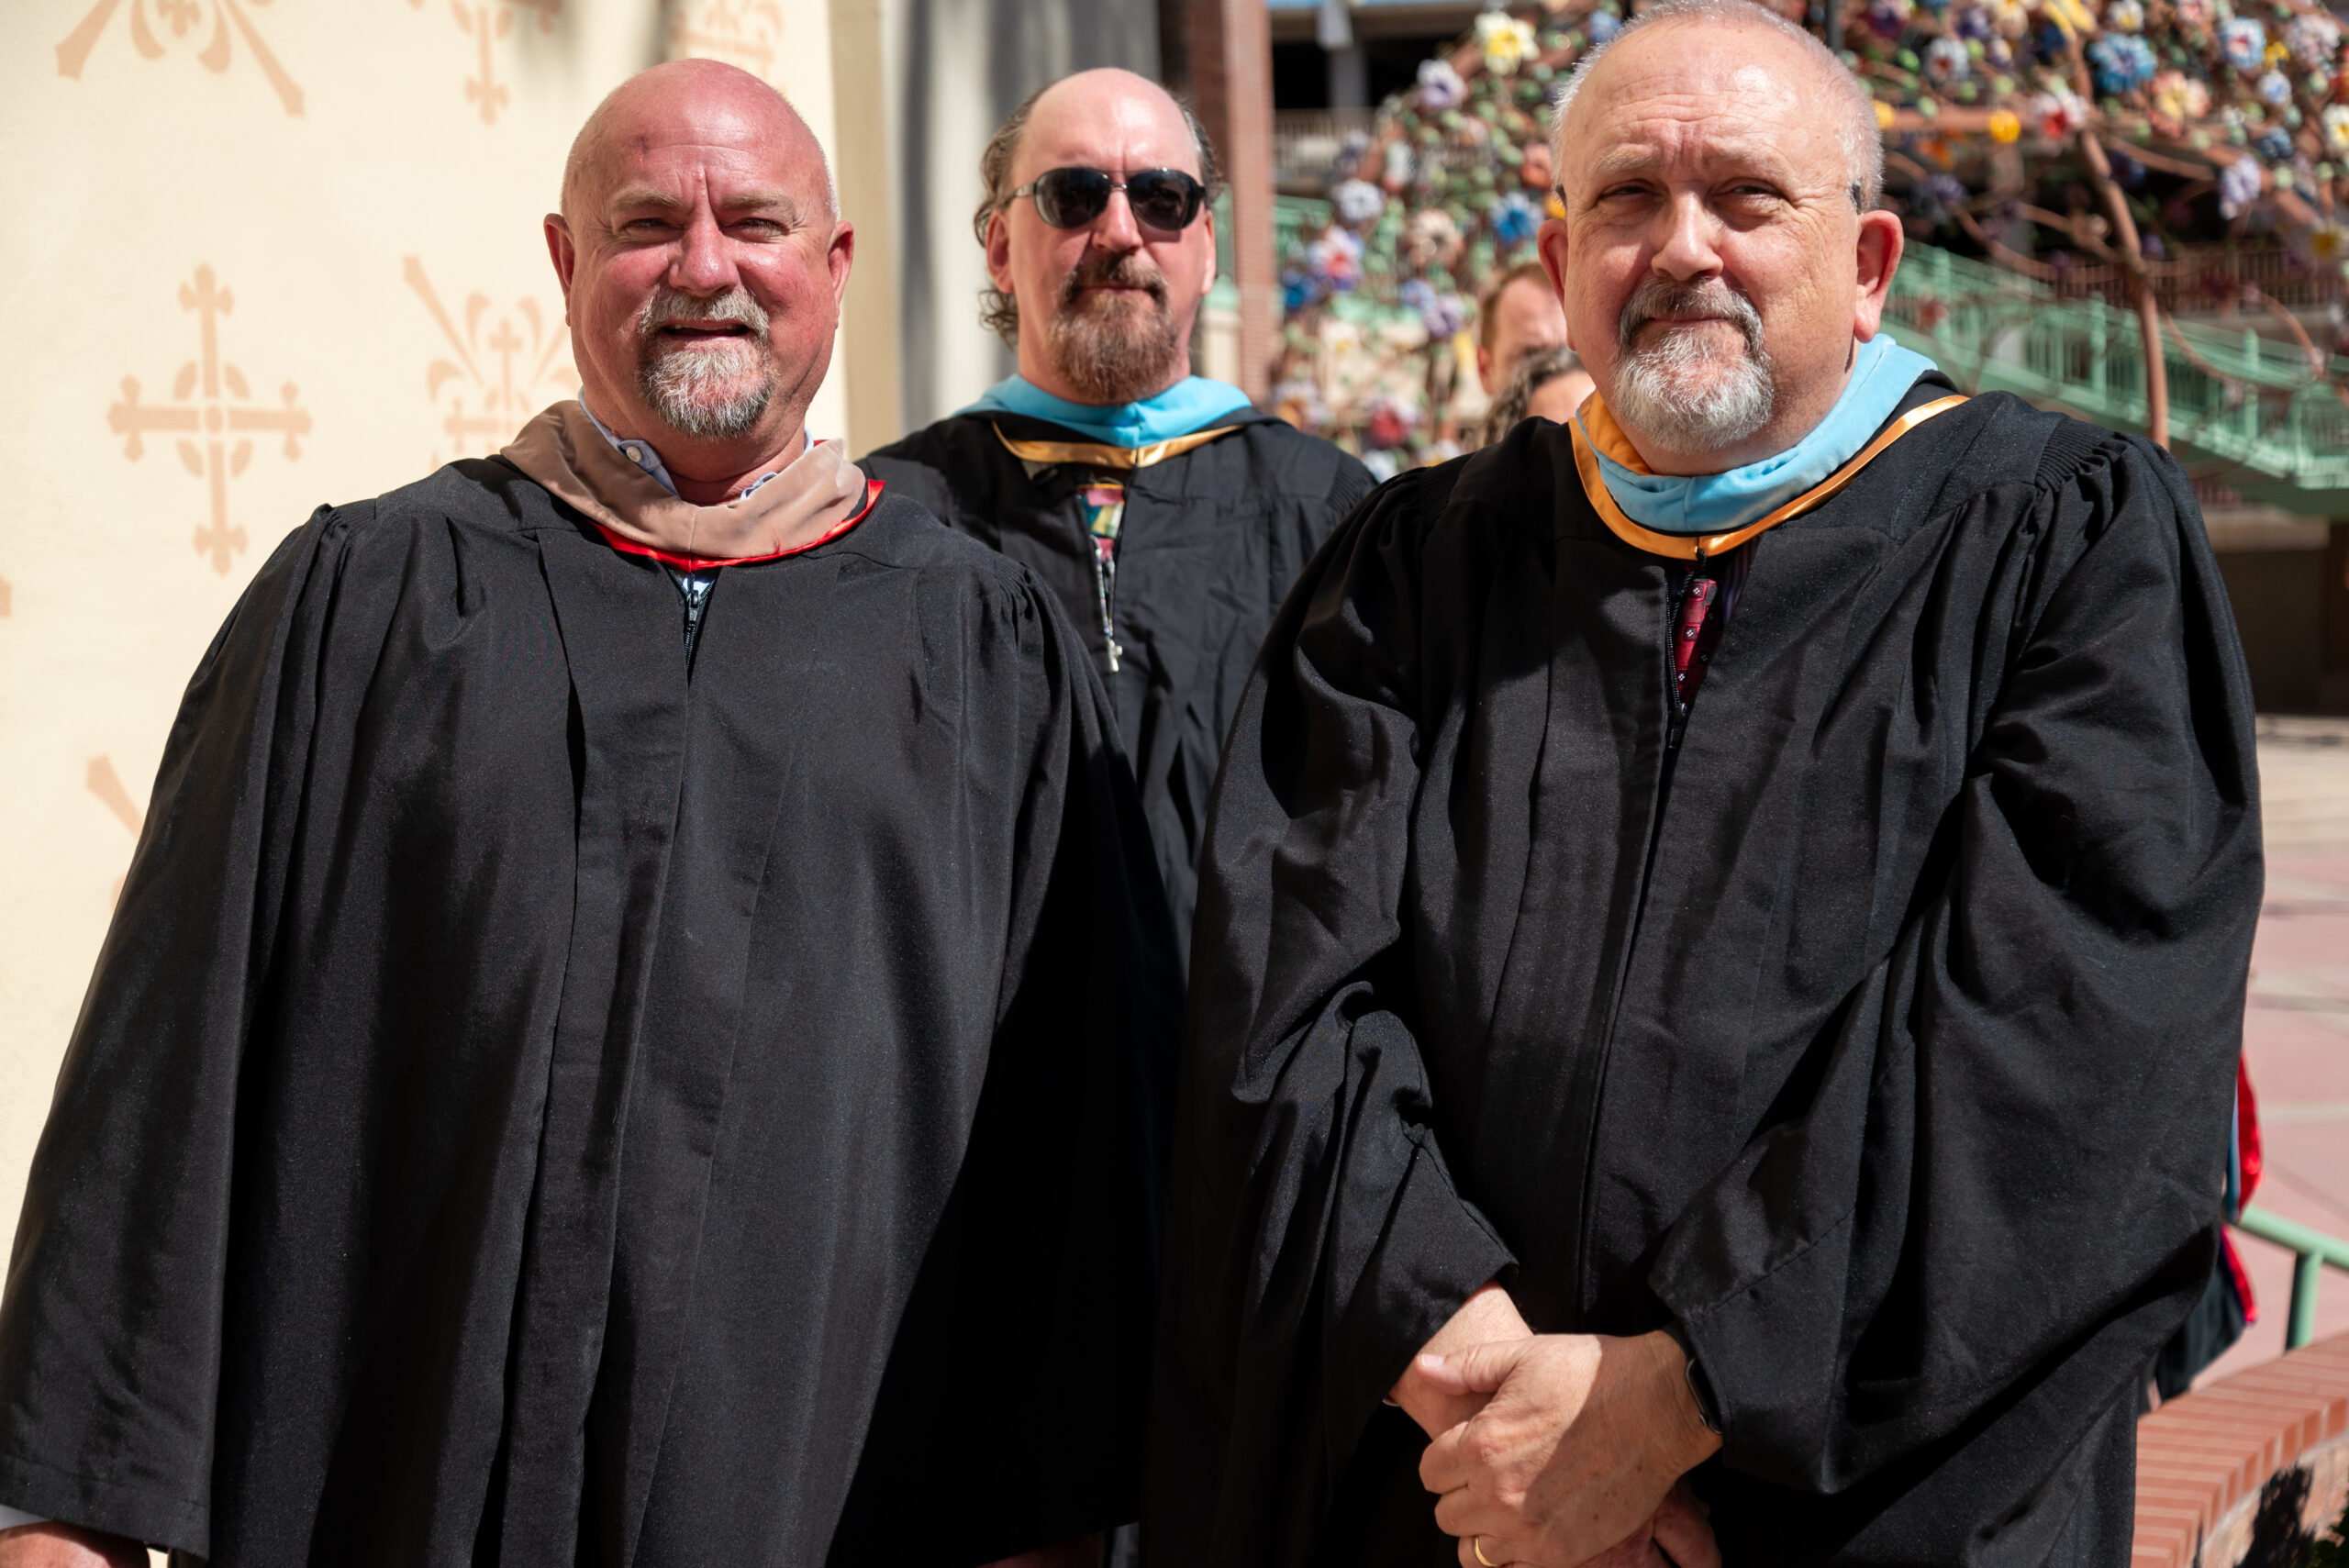 Faculty in graduation gowns